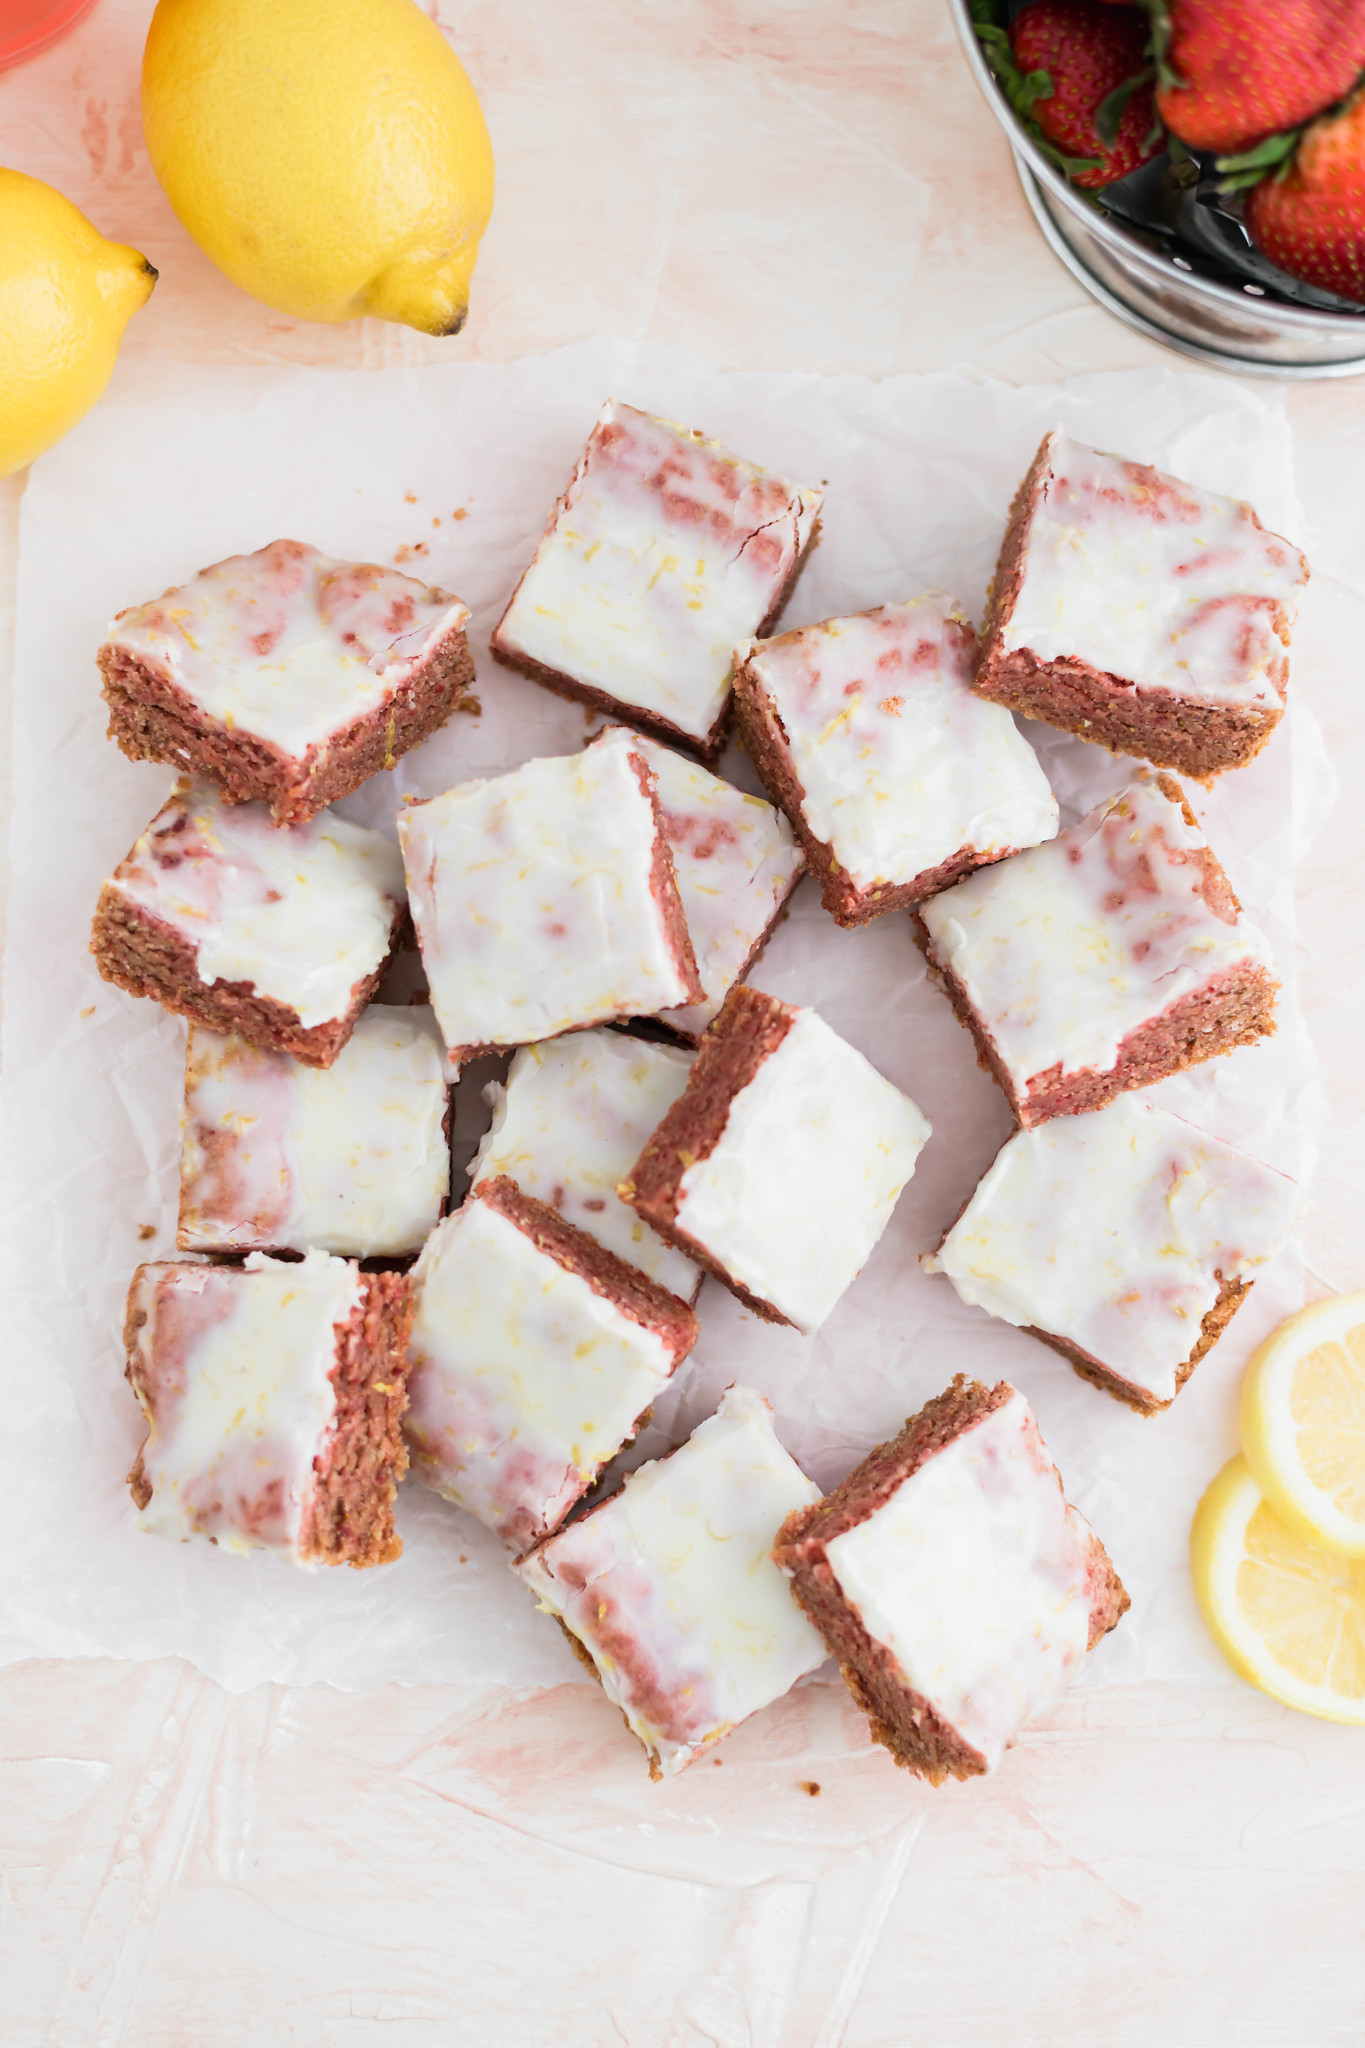 Looking for a sweet and zingy dessert perfect for spring? These Strawberry Lemonade Bars are quick to make and start with a lemon cake mix.